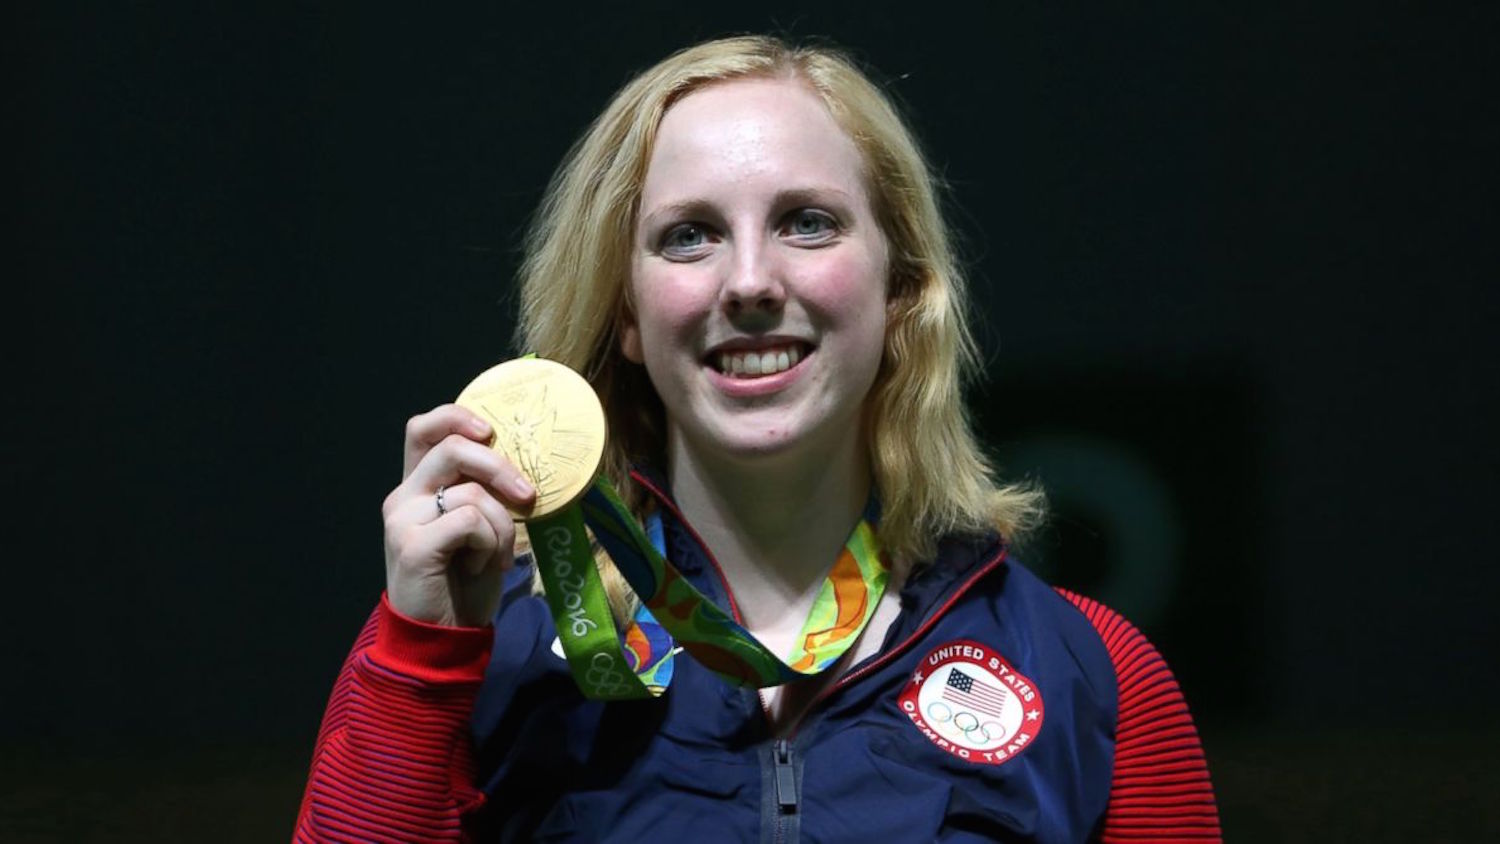 American teenage rifle champion secures first gold medal of Rio games